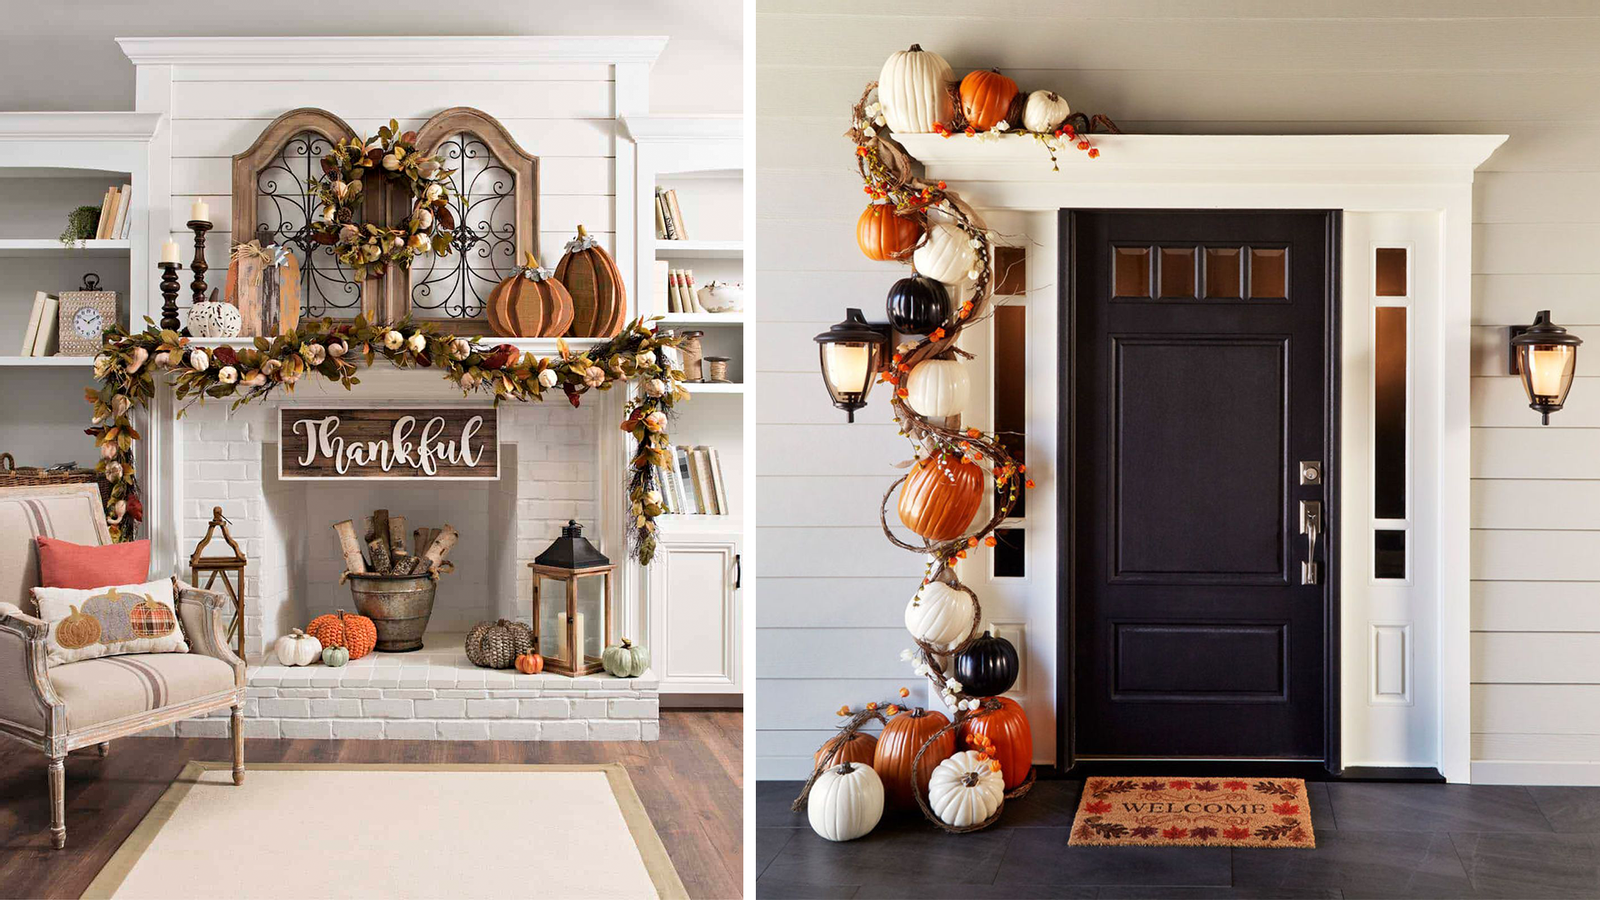 6 Ways to Make Your Home Stand Out This Fall